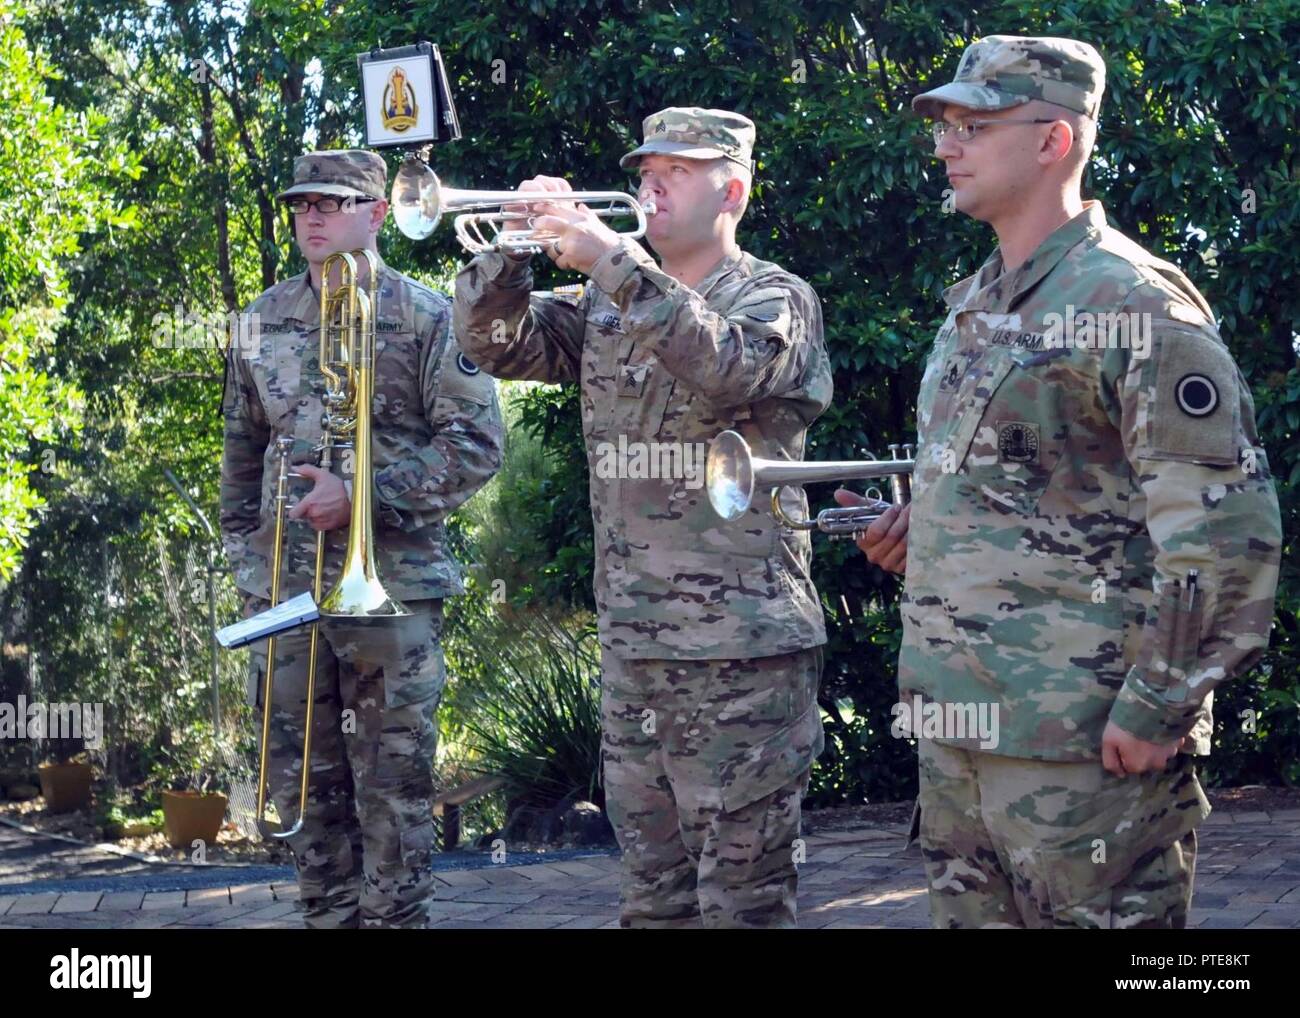 Sgt. Mark Koehl, an army musician, American's First Corps Army Band, plays  “Rouse” while Sgt. 1st Class Todd Borges, music performance team leader,  Staff Sgt. Brandon Egner, assistant music performance team leader,